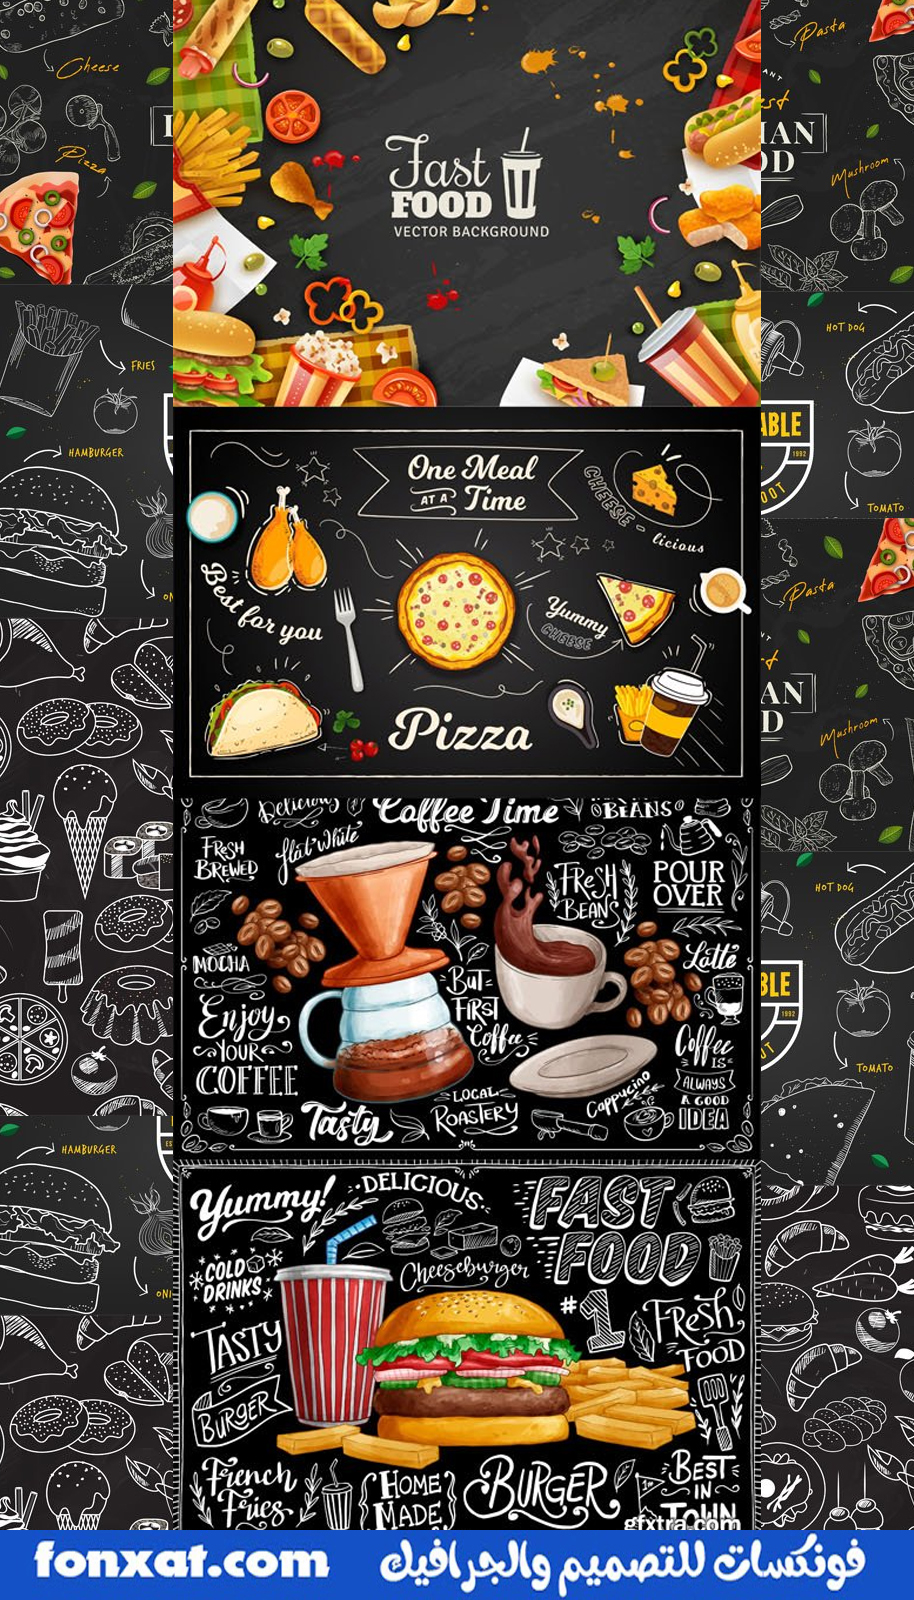 A set of food backgrounds available in vector photoshop format